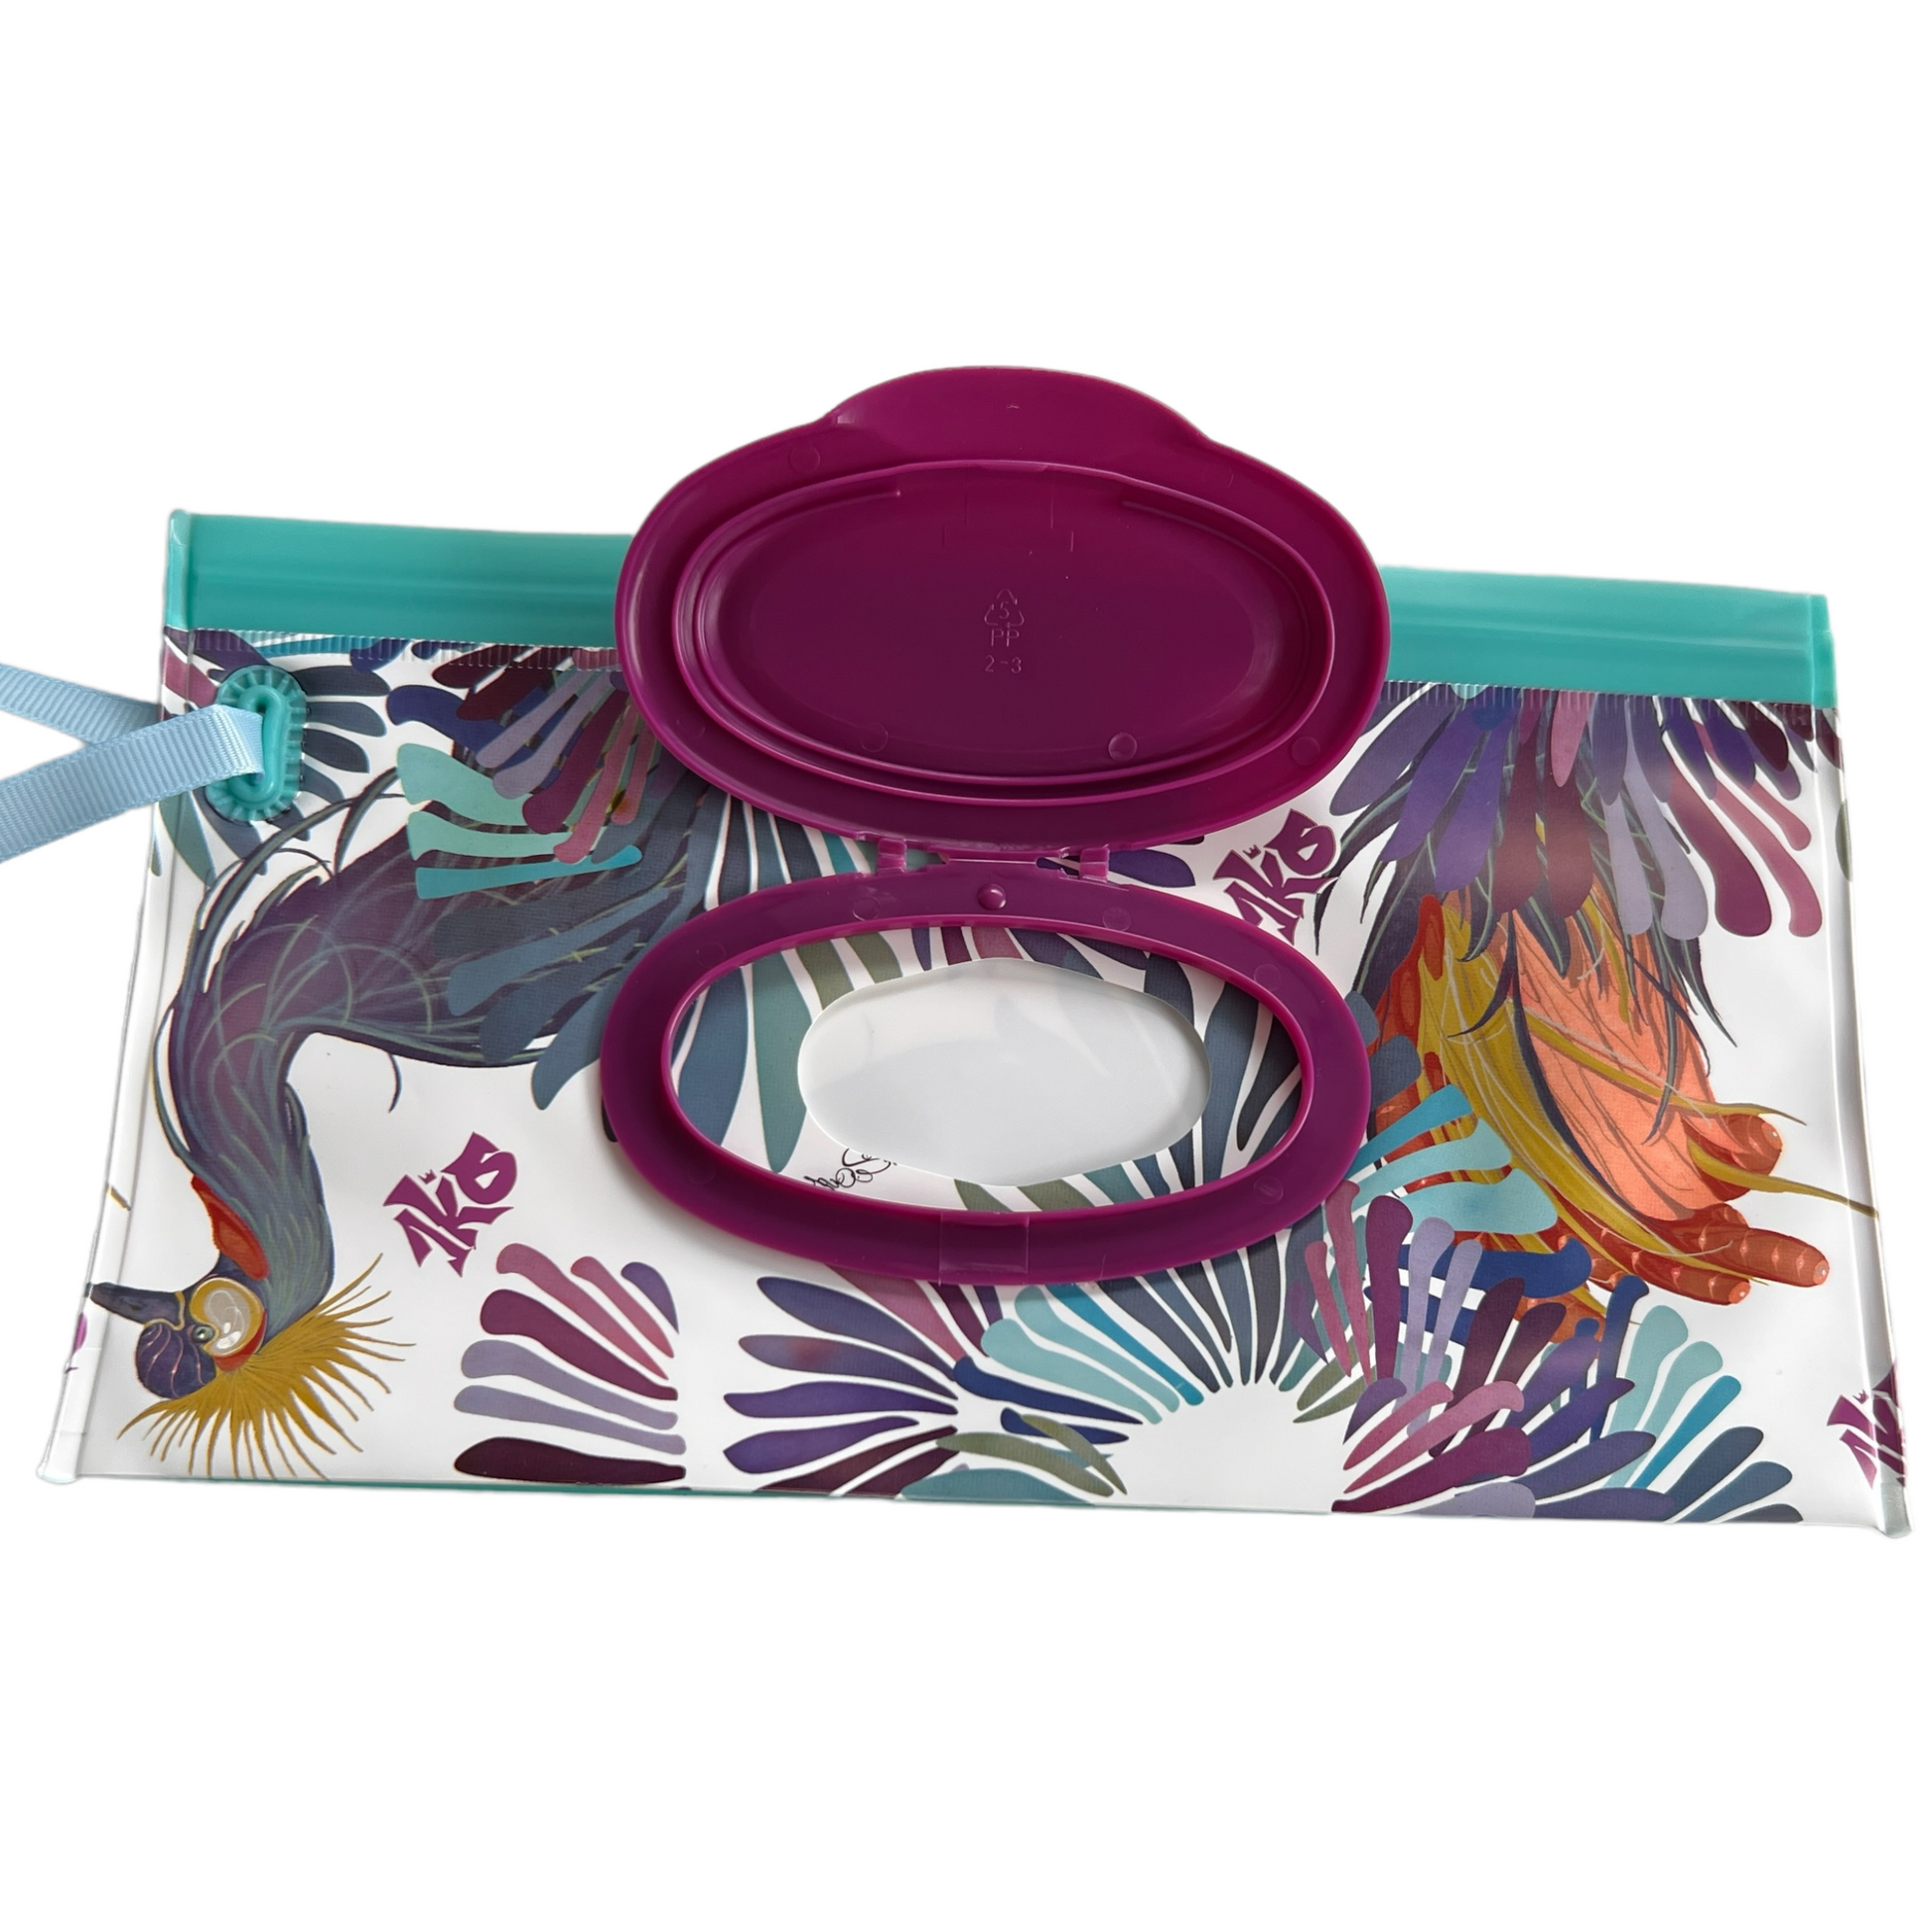 Wet Wipes Travel Potable (Could be called Reusable Wet Wipe Bag — Large Travel Pouches SPIRIT SPARKPLUGS Flower pattern Purple + Teal 